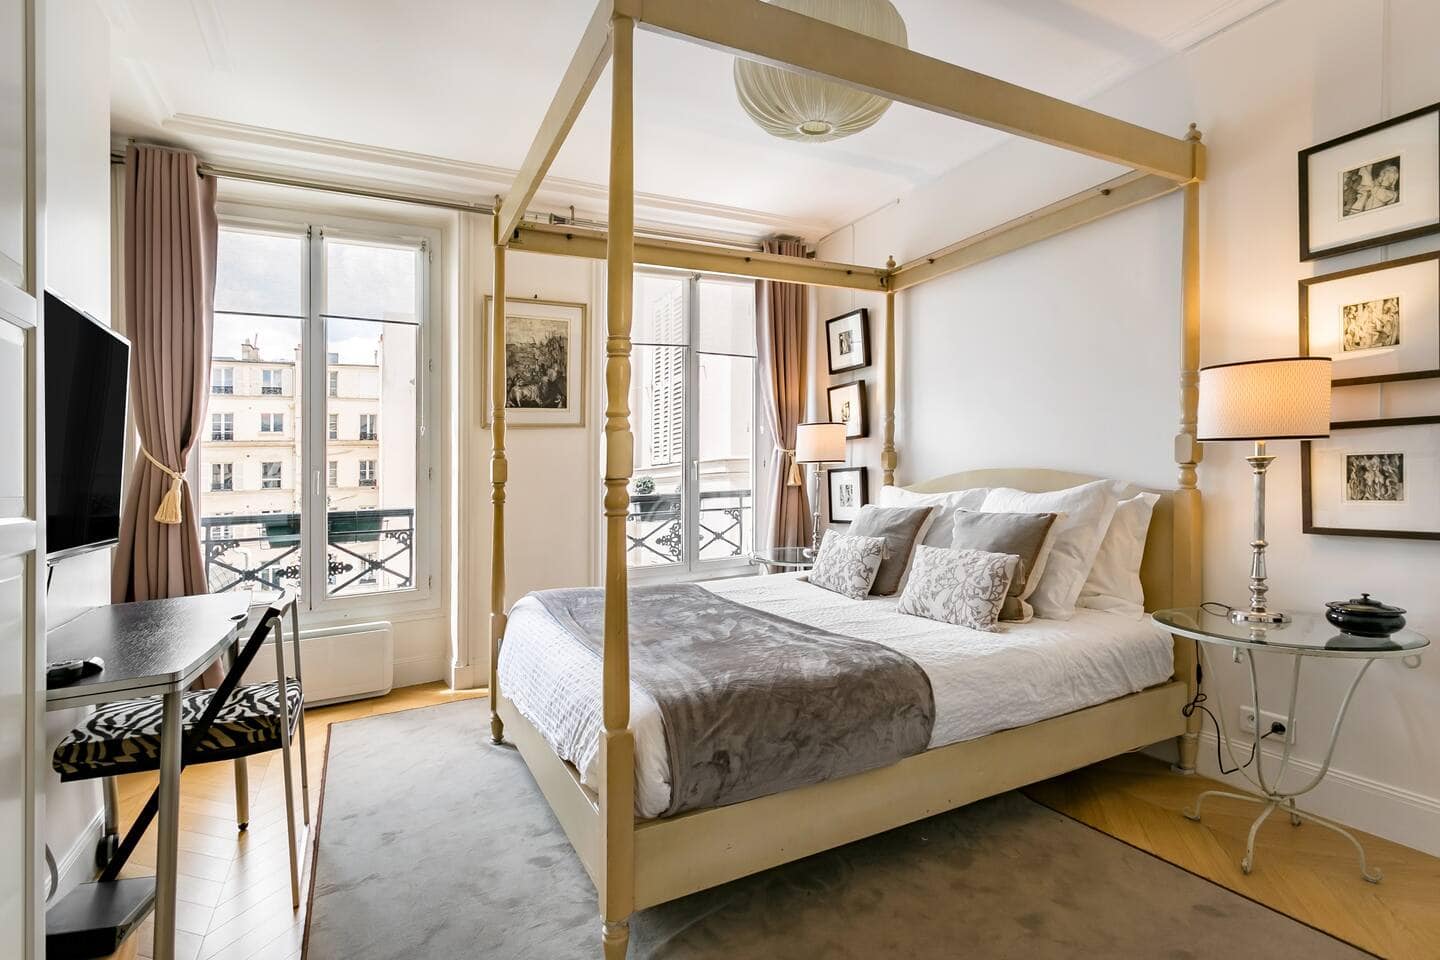 Horizontal photo of our host Rene's Air BnB home in Paris.